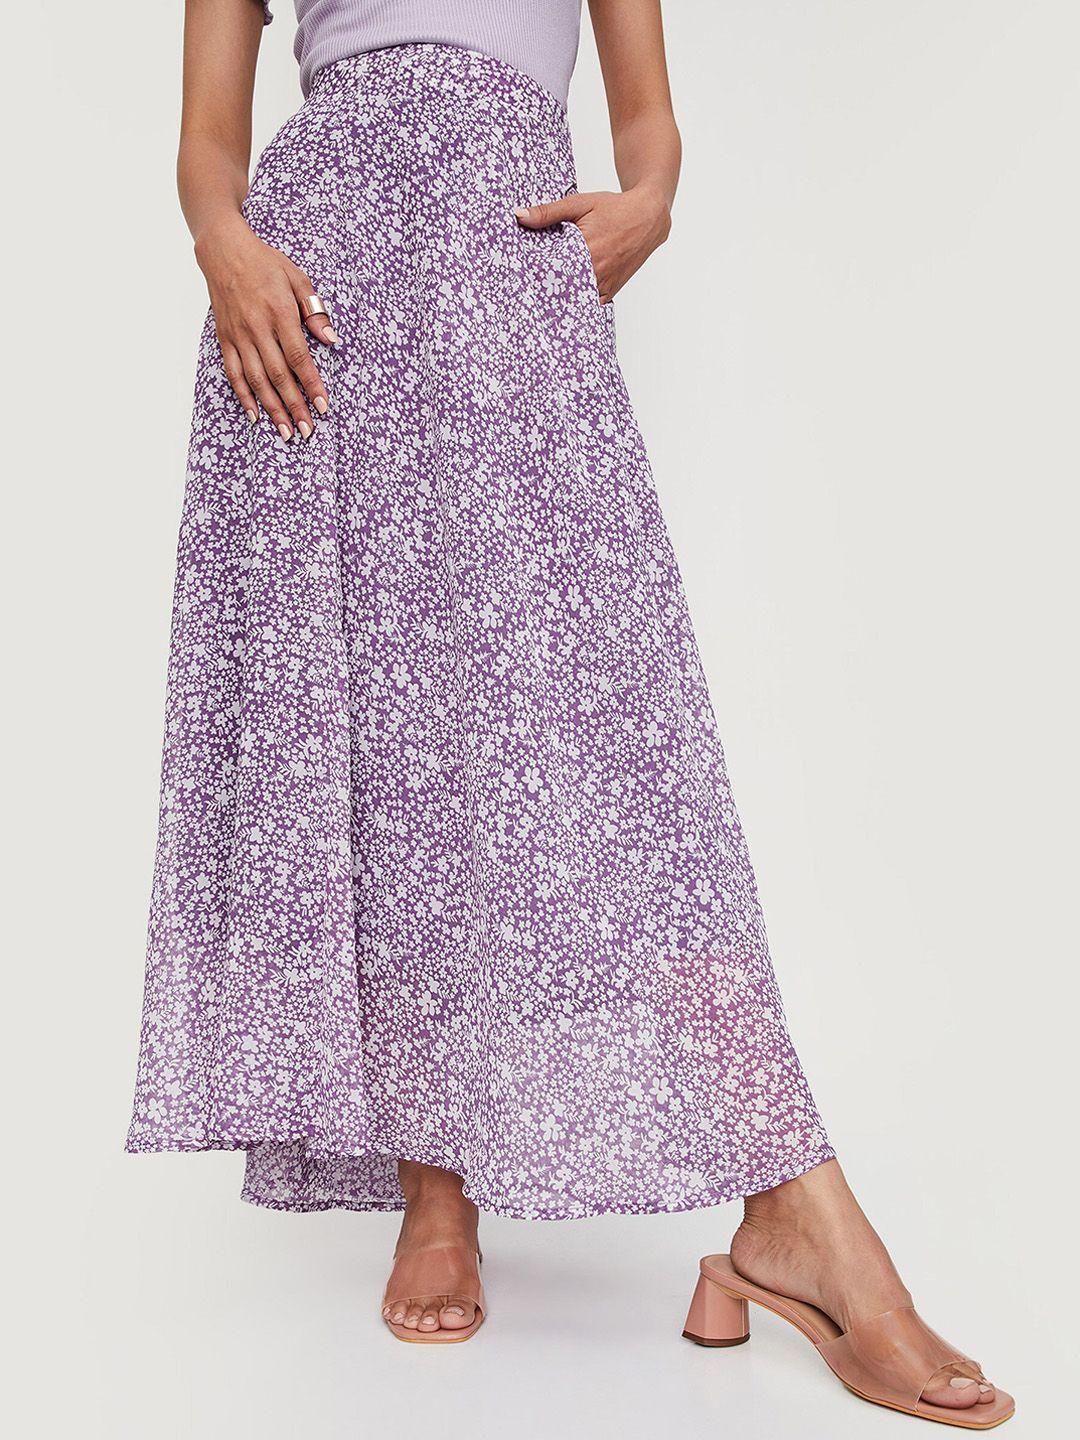 max women floral printed maxi-length flared skirt